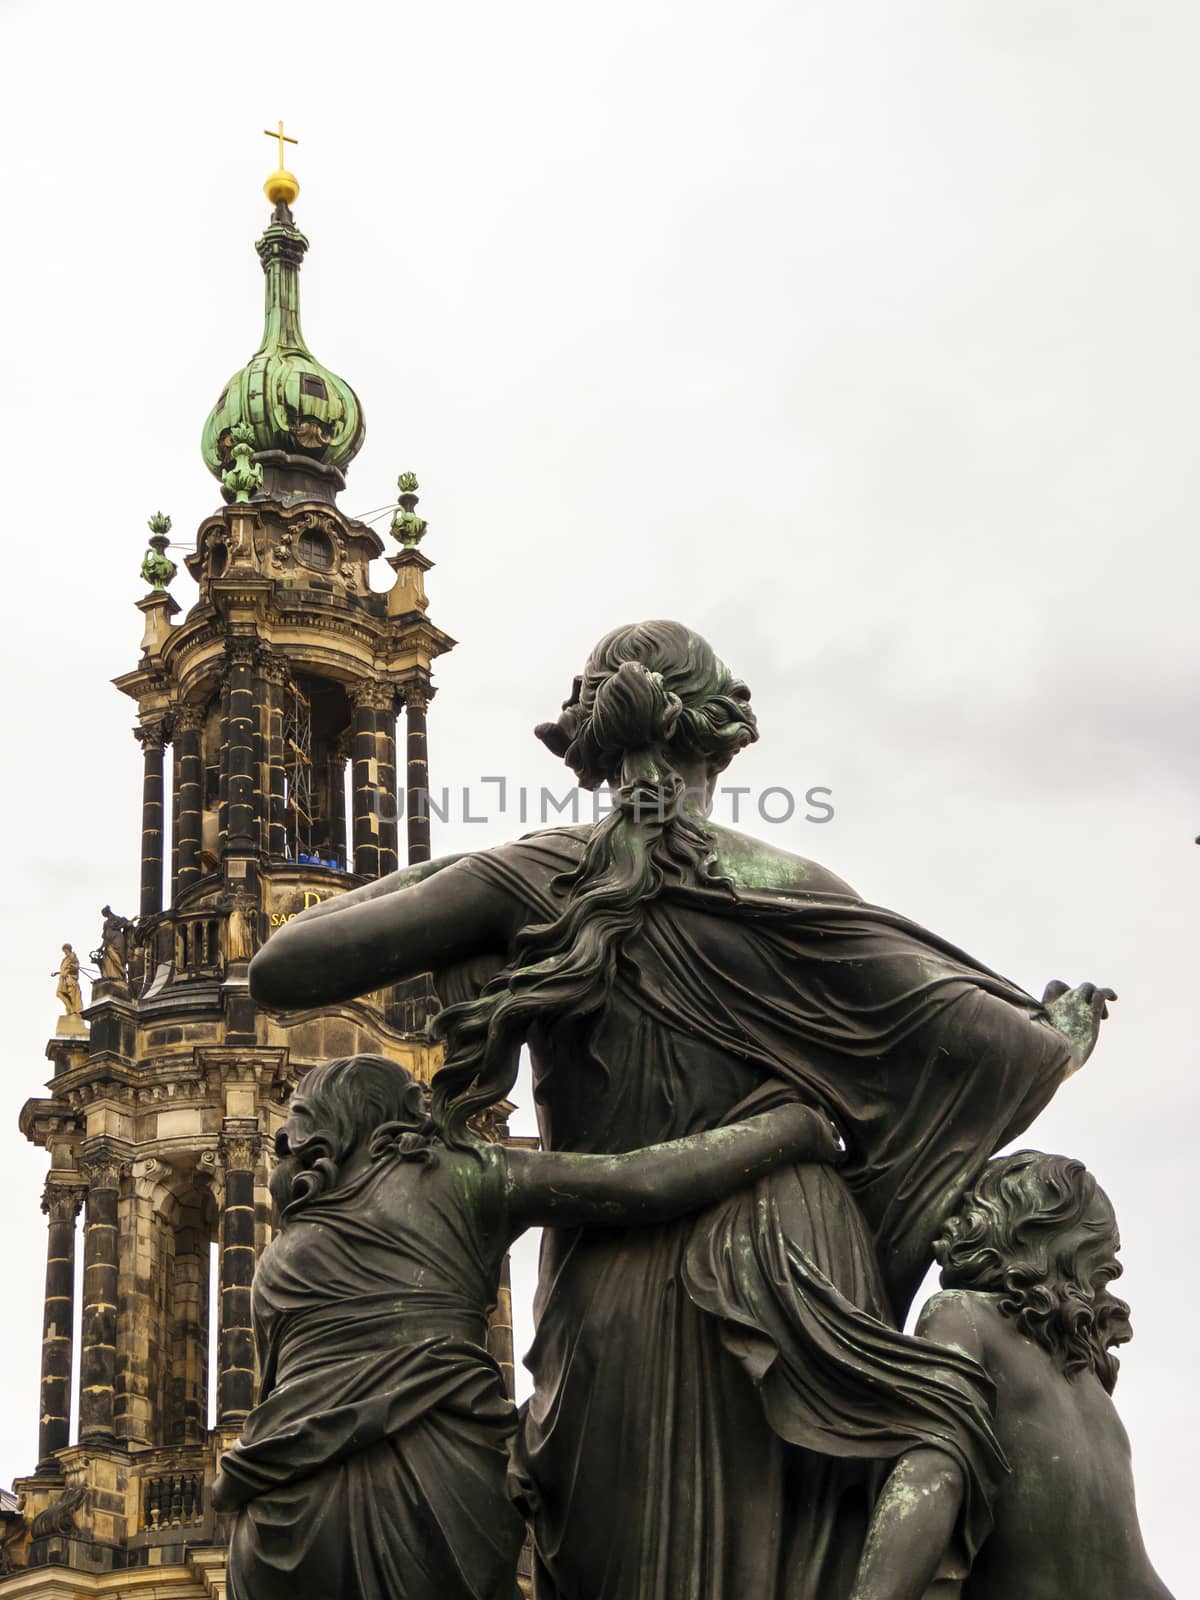 Statue in front of the bell tower of the Dresden Cathedral, the Cathedral of the Holy Trinity, the Catholic Church of the Royal Court of Saxony. Germany.